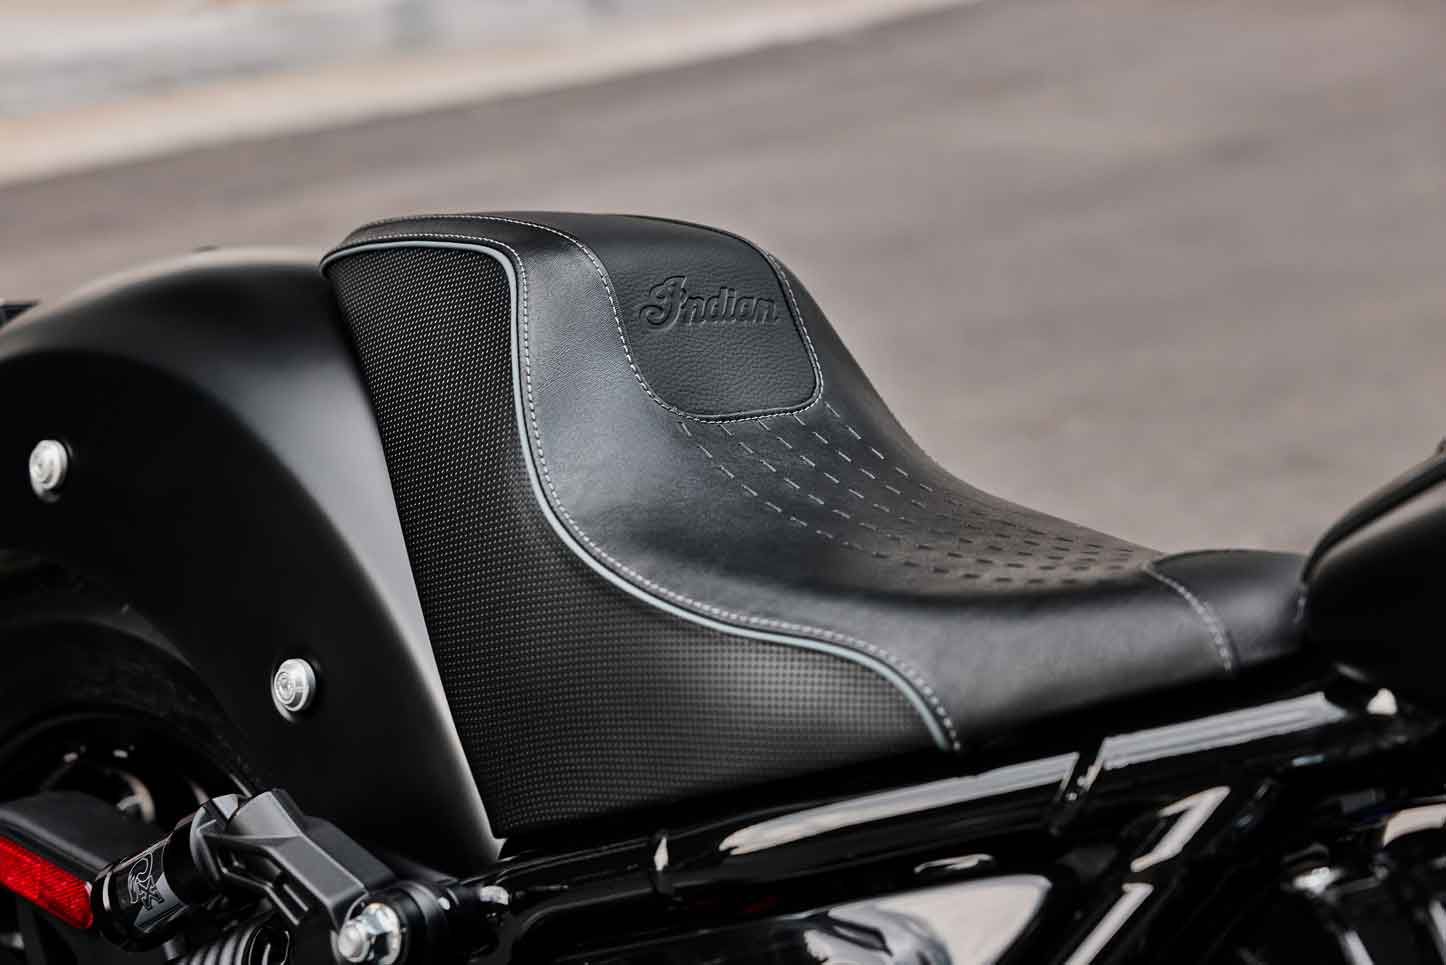 The Sport Chief comes with a solo gunfighter seat, standard.